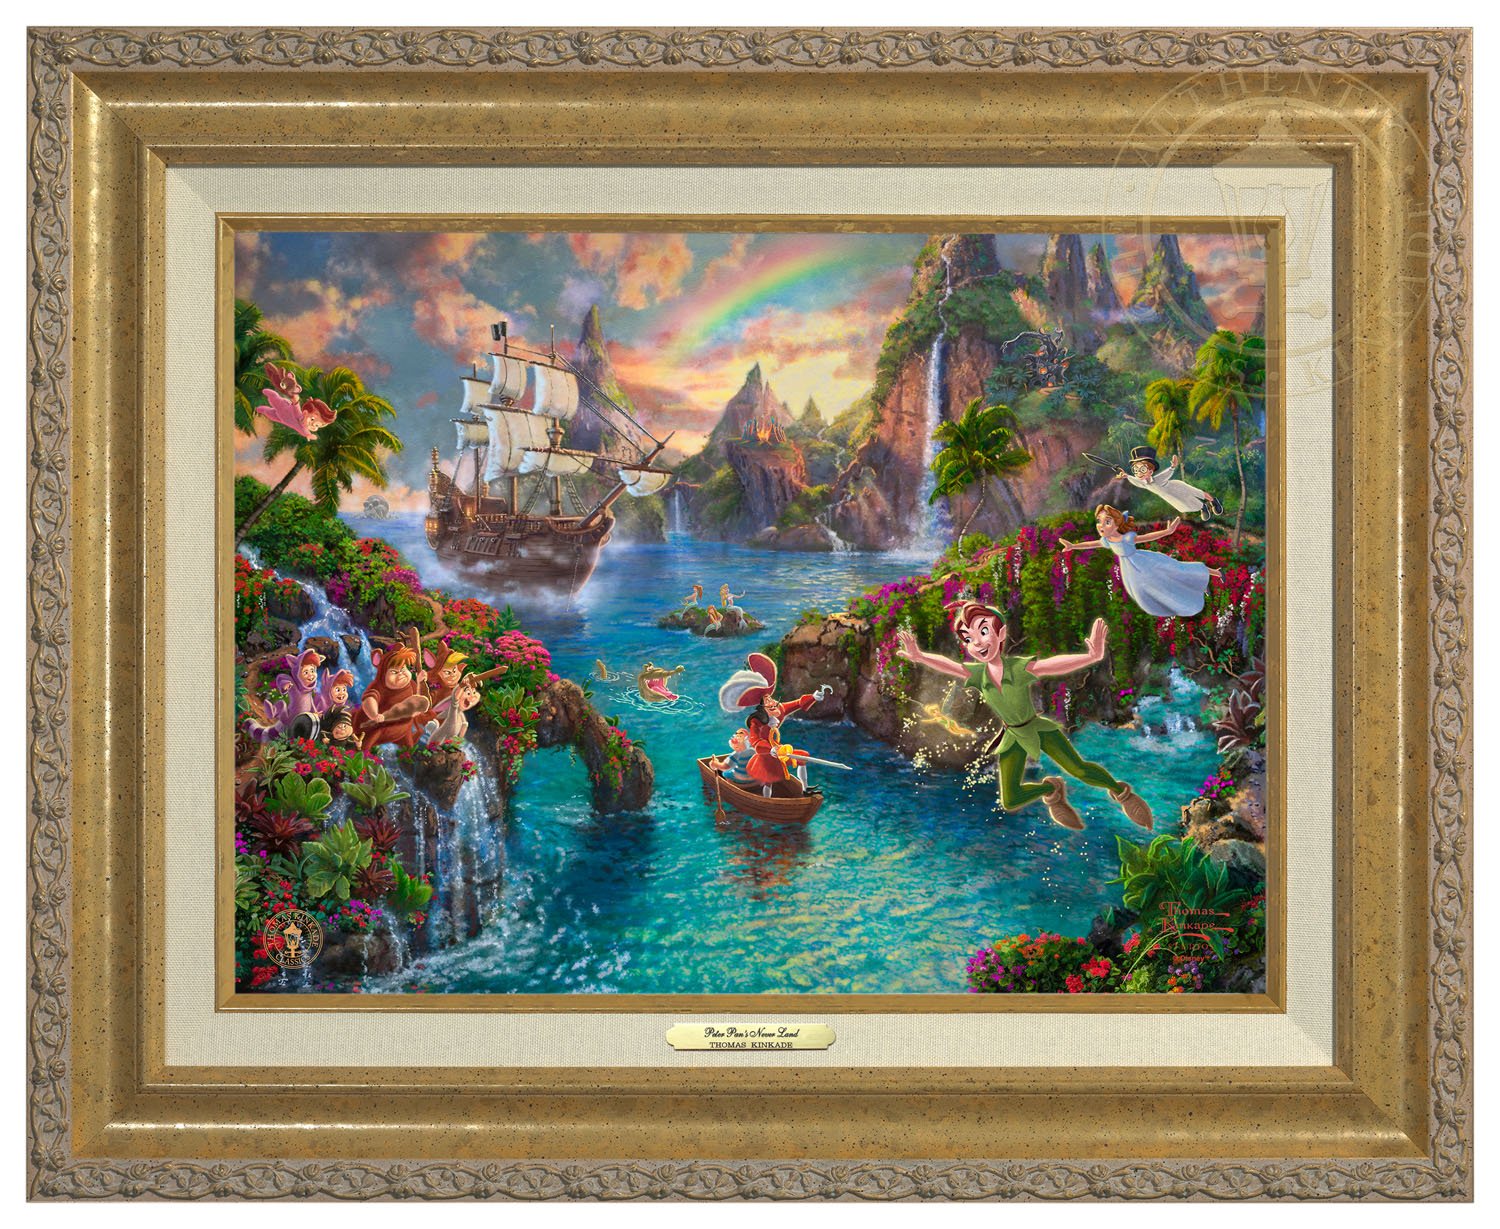 Peter battling his nemesis Captain Hook, with the help of Wendy, Michael, John, The Lost Boys, and his beloved pal Tinker Bell - Antique Gold Frame